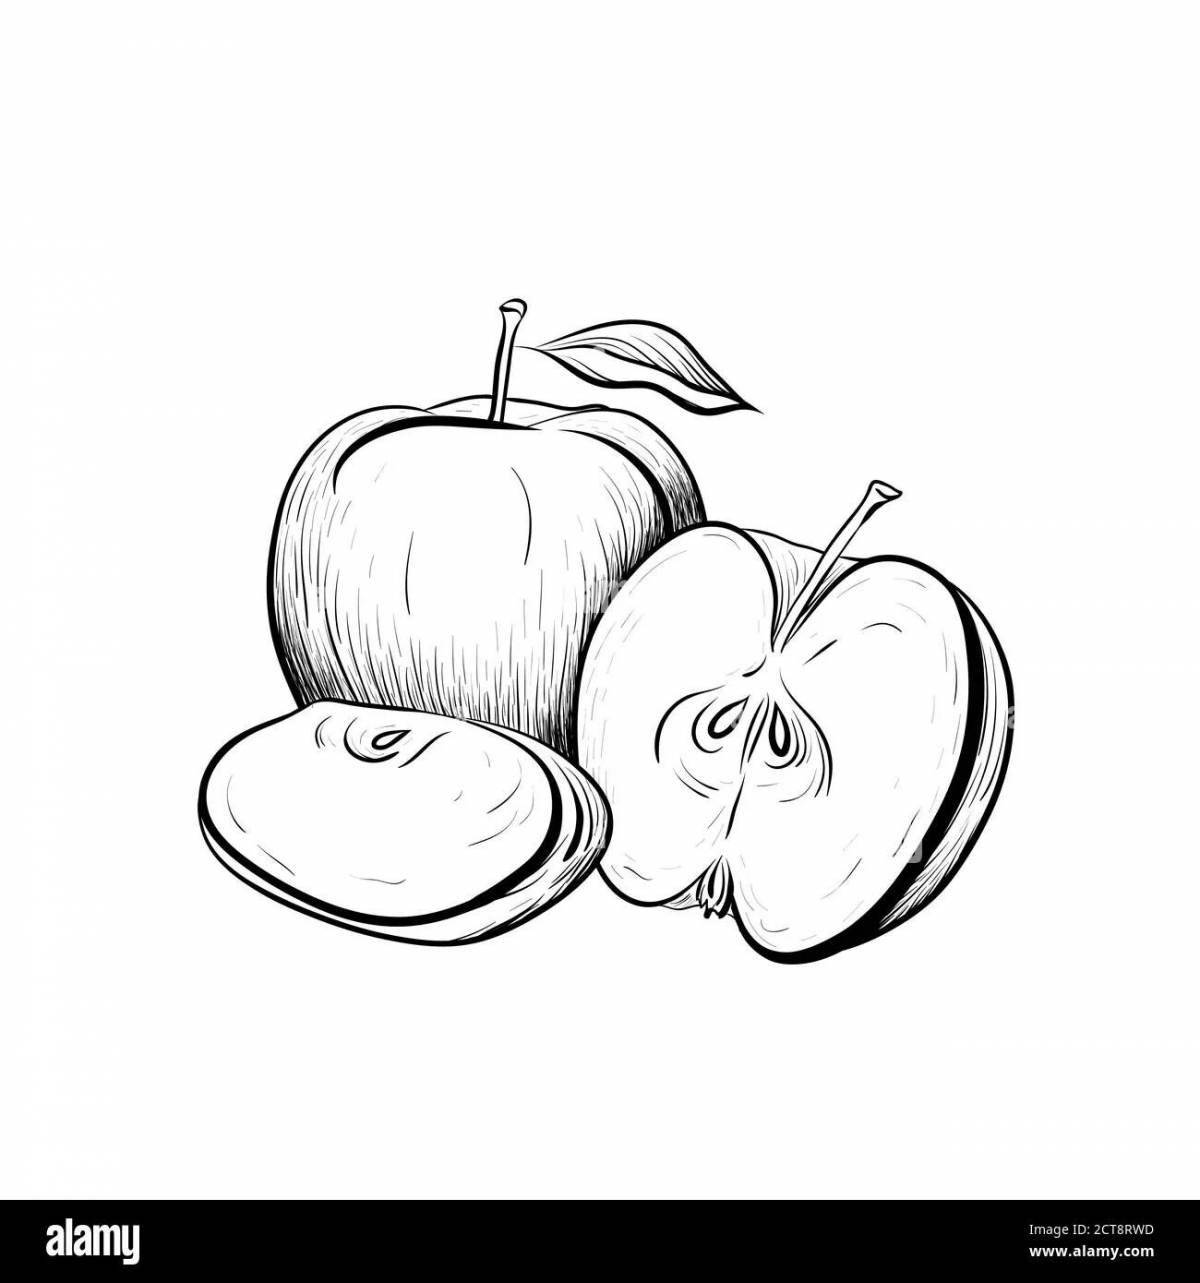 Coloring page of a freshly cut apple